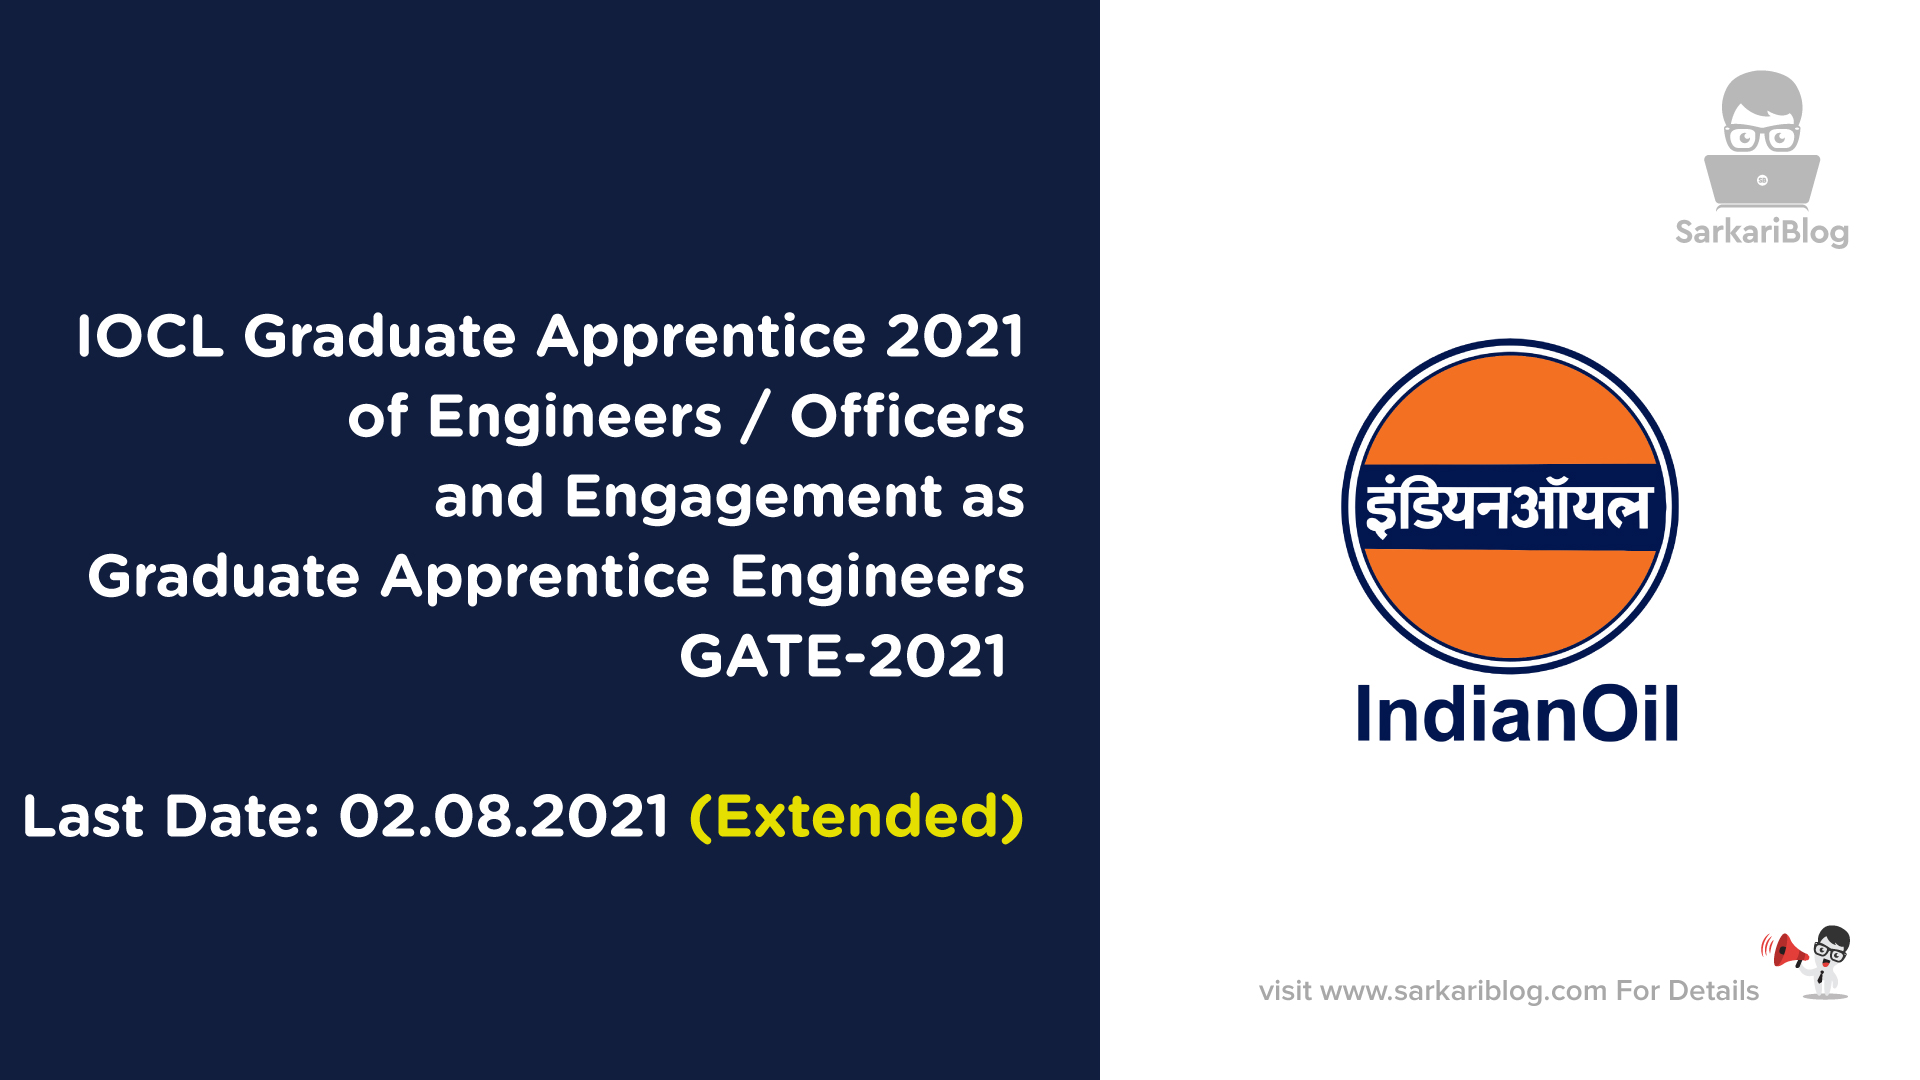 IOCL Graduate Apprentice 2021 of Engineers / Officers and Engagement as Graduate Apprentice Engineers GATE-2021